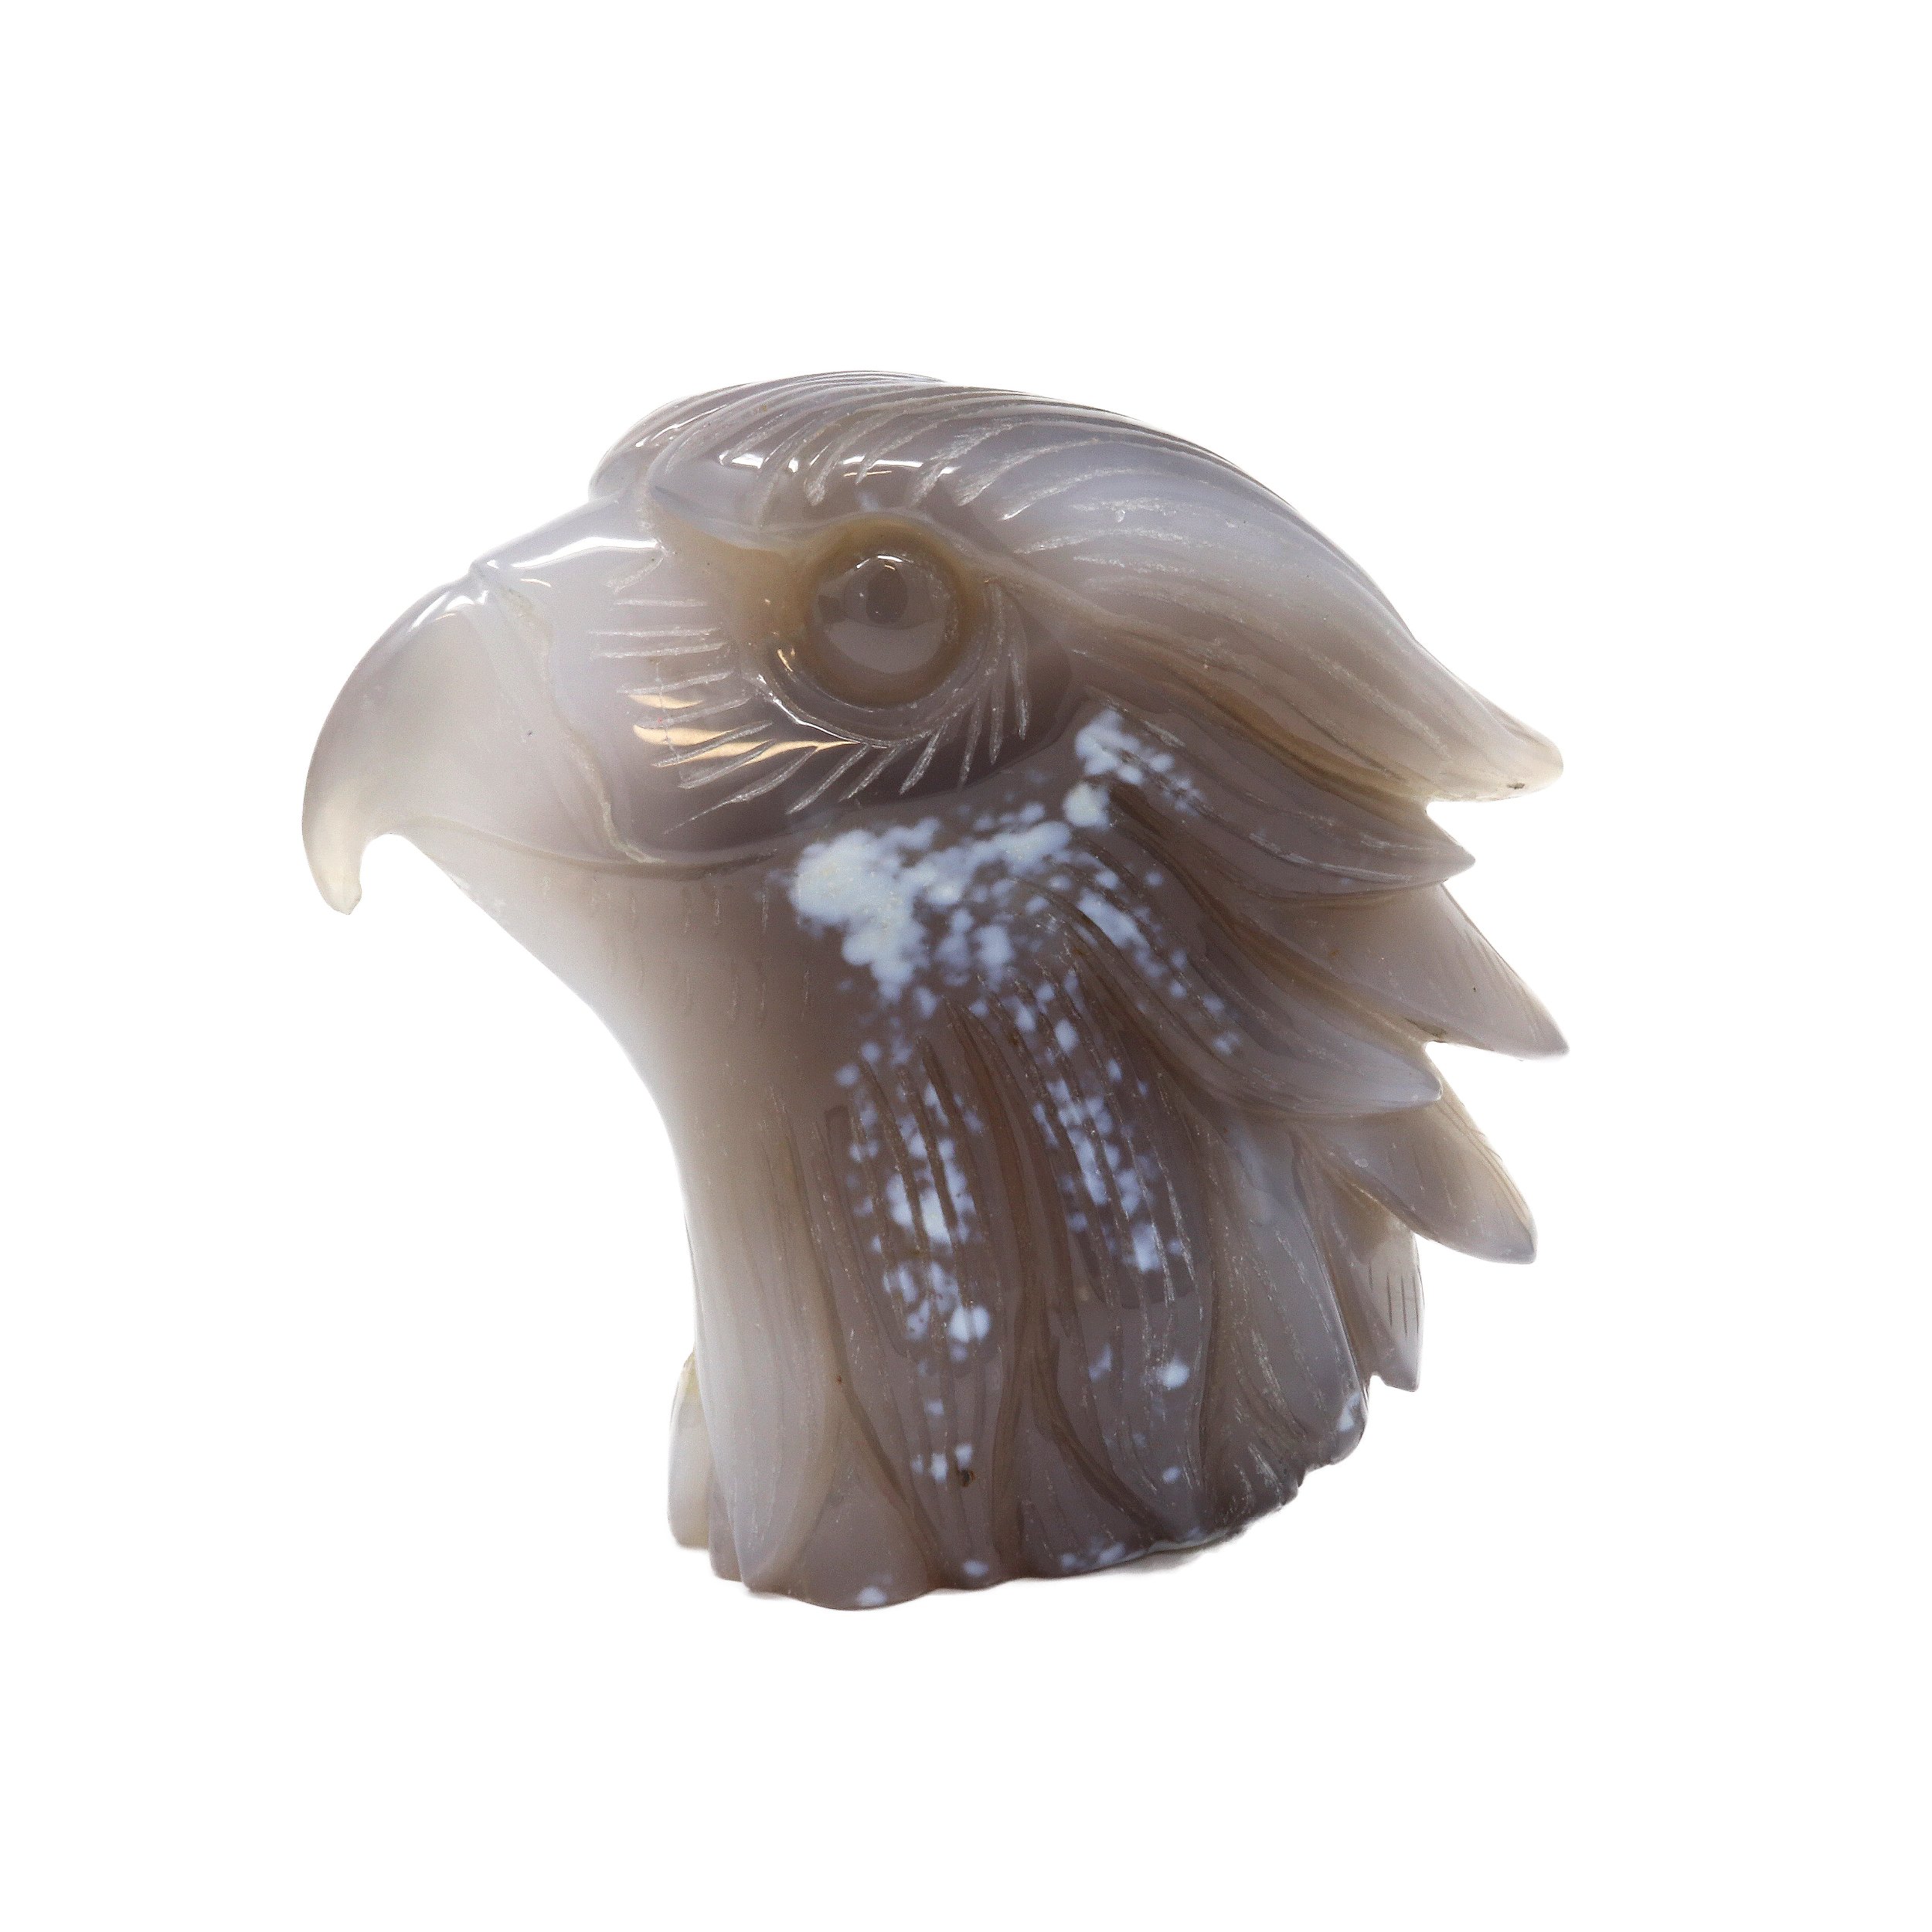 Agate Geode Eagle Head Carving With Druze